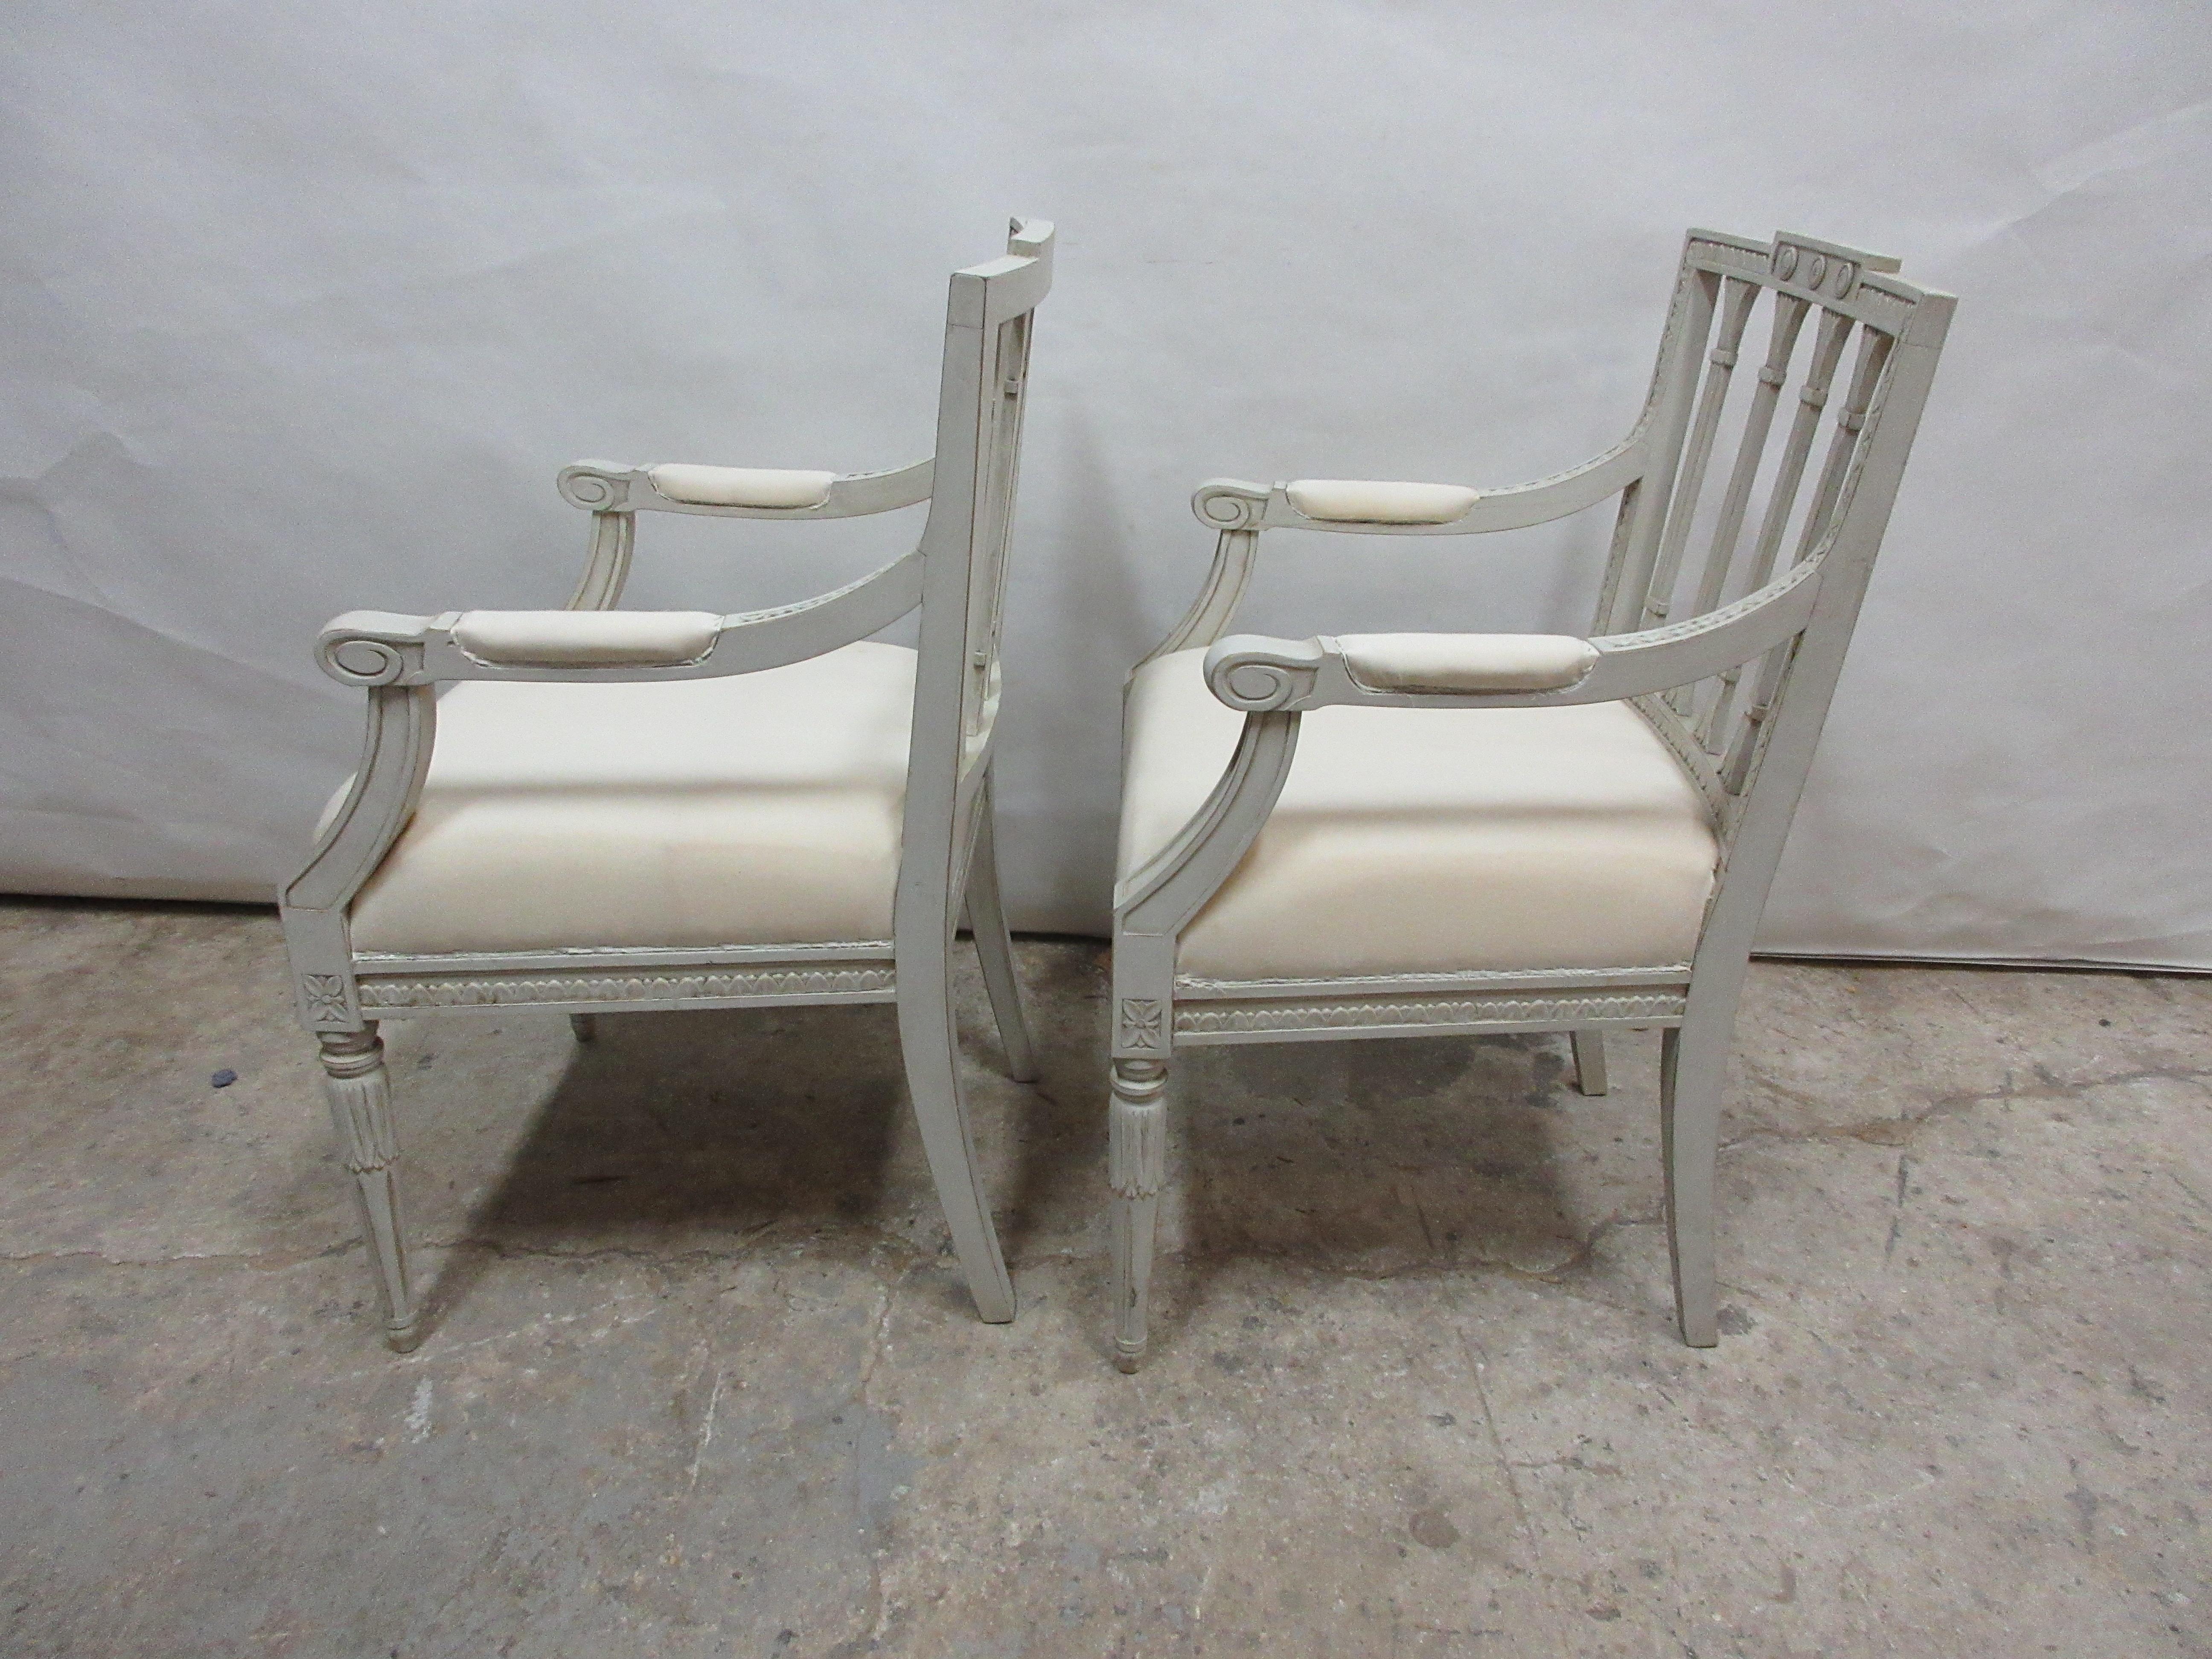 This is a set of 2 Swedish Gustavian armchairs, they have been restored and repainted with milk paints 